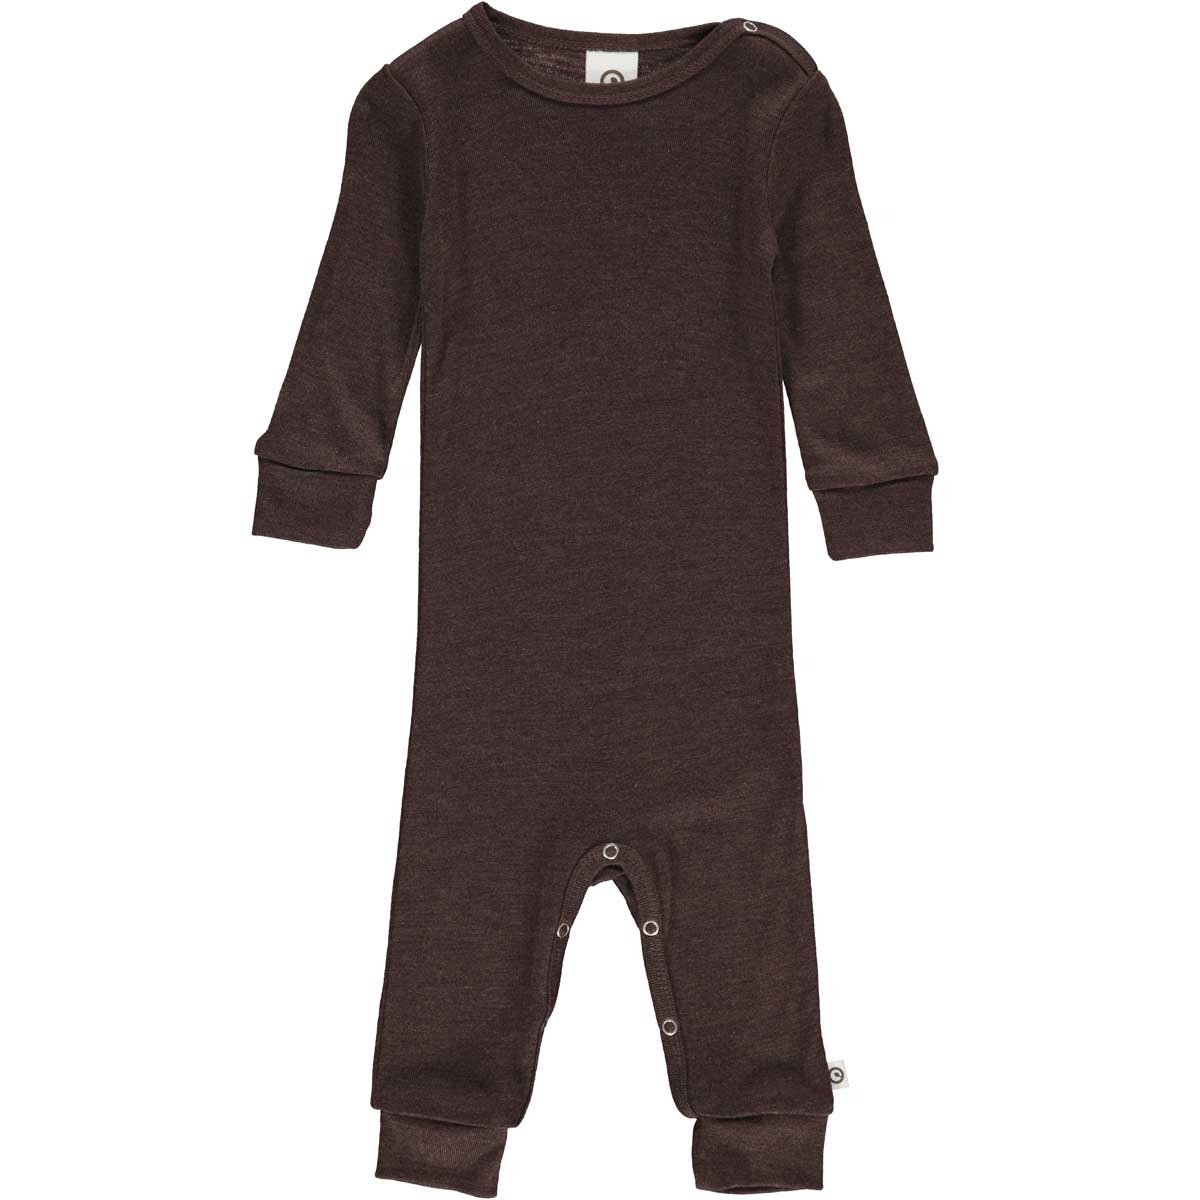 MAMA.LICIOUS Wool baby-one-piece suit -Coffee - 1584052300